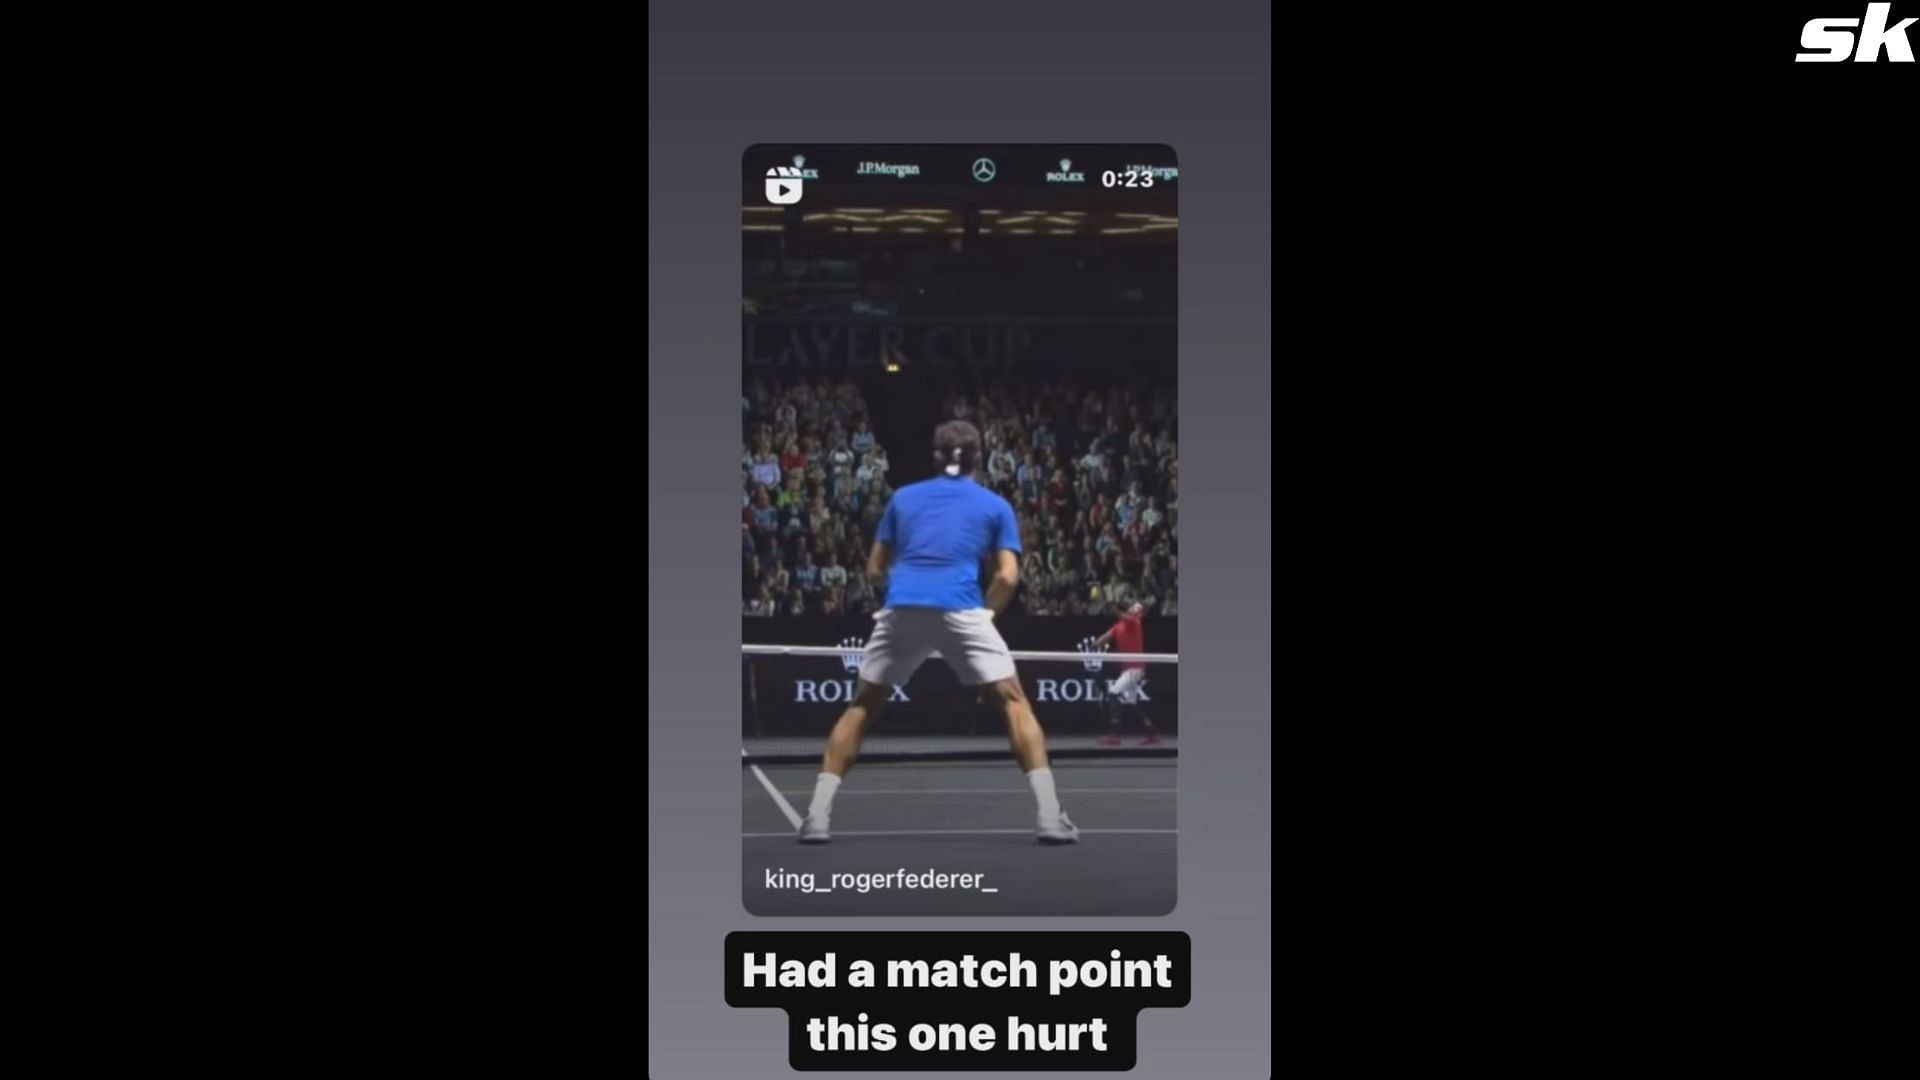 Nick Kyrgios revisits his 2017 Laver Cup epic against Roger Federer